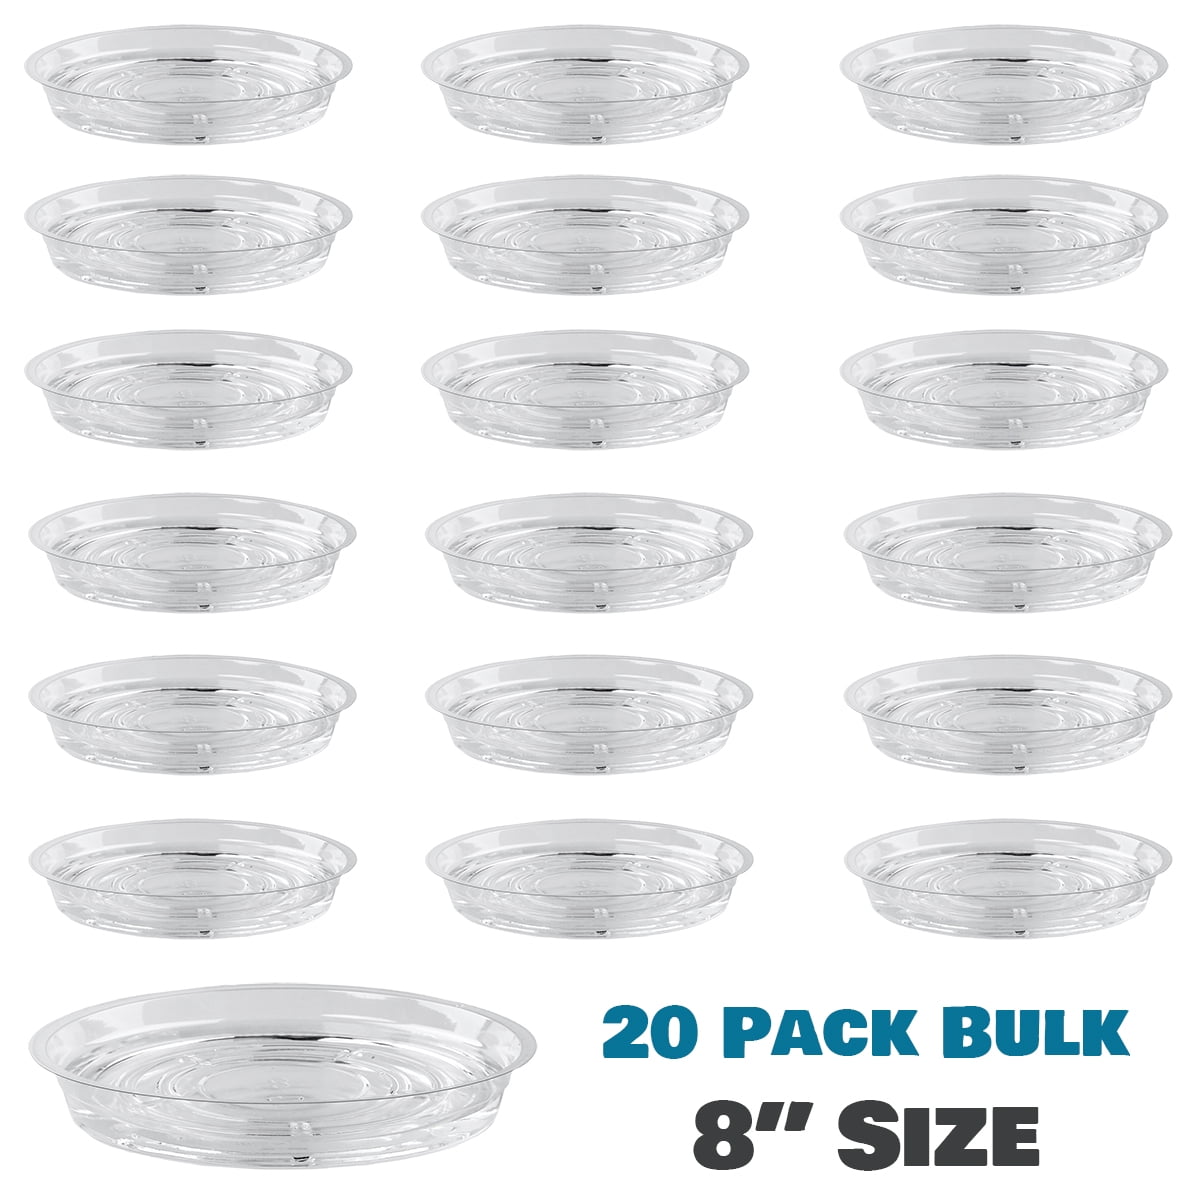 Details about   Large Small Round Strong Plastic Plant Pot Saucer Base Saucers Drip Tray S2Y7 